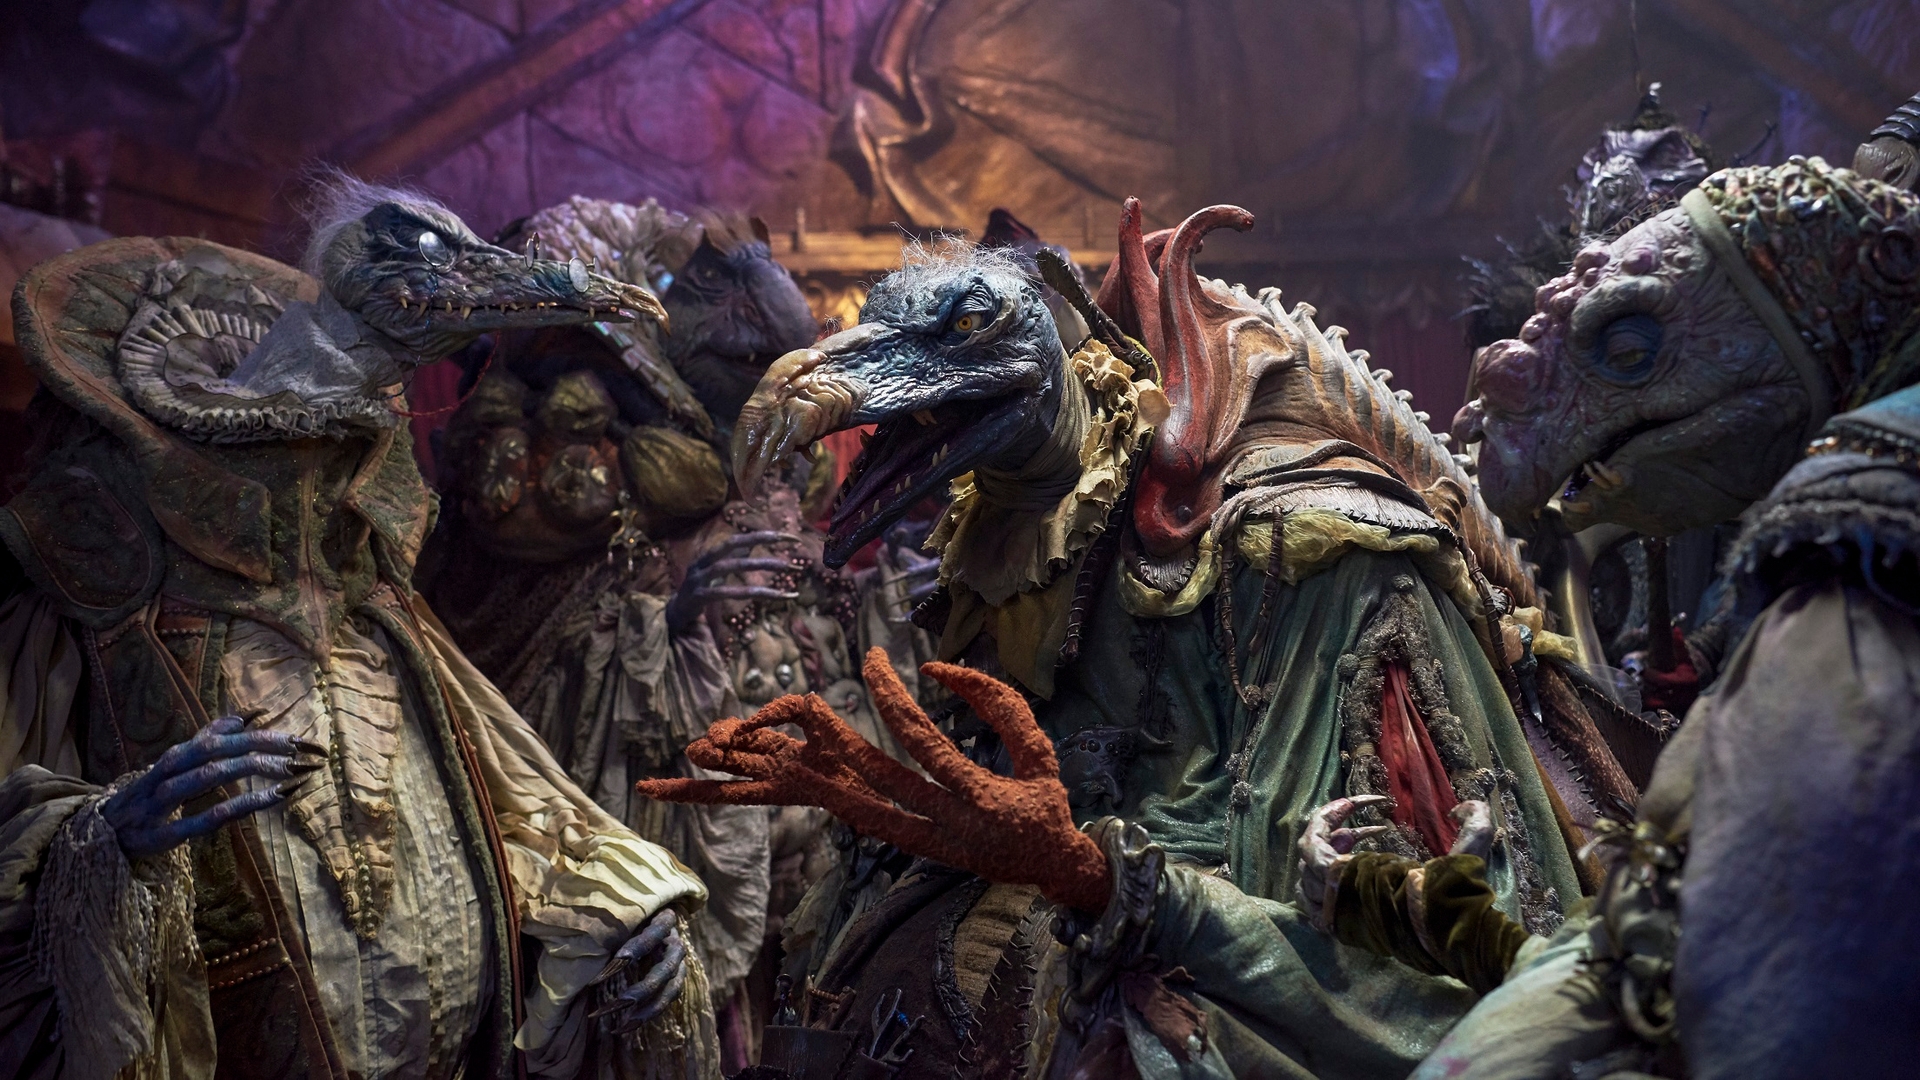 The Dark Crystal: Age of Resistance